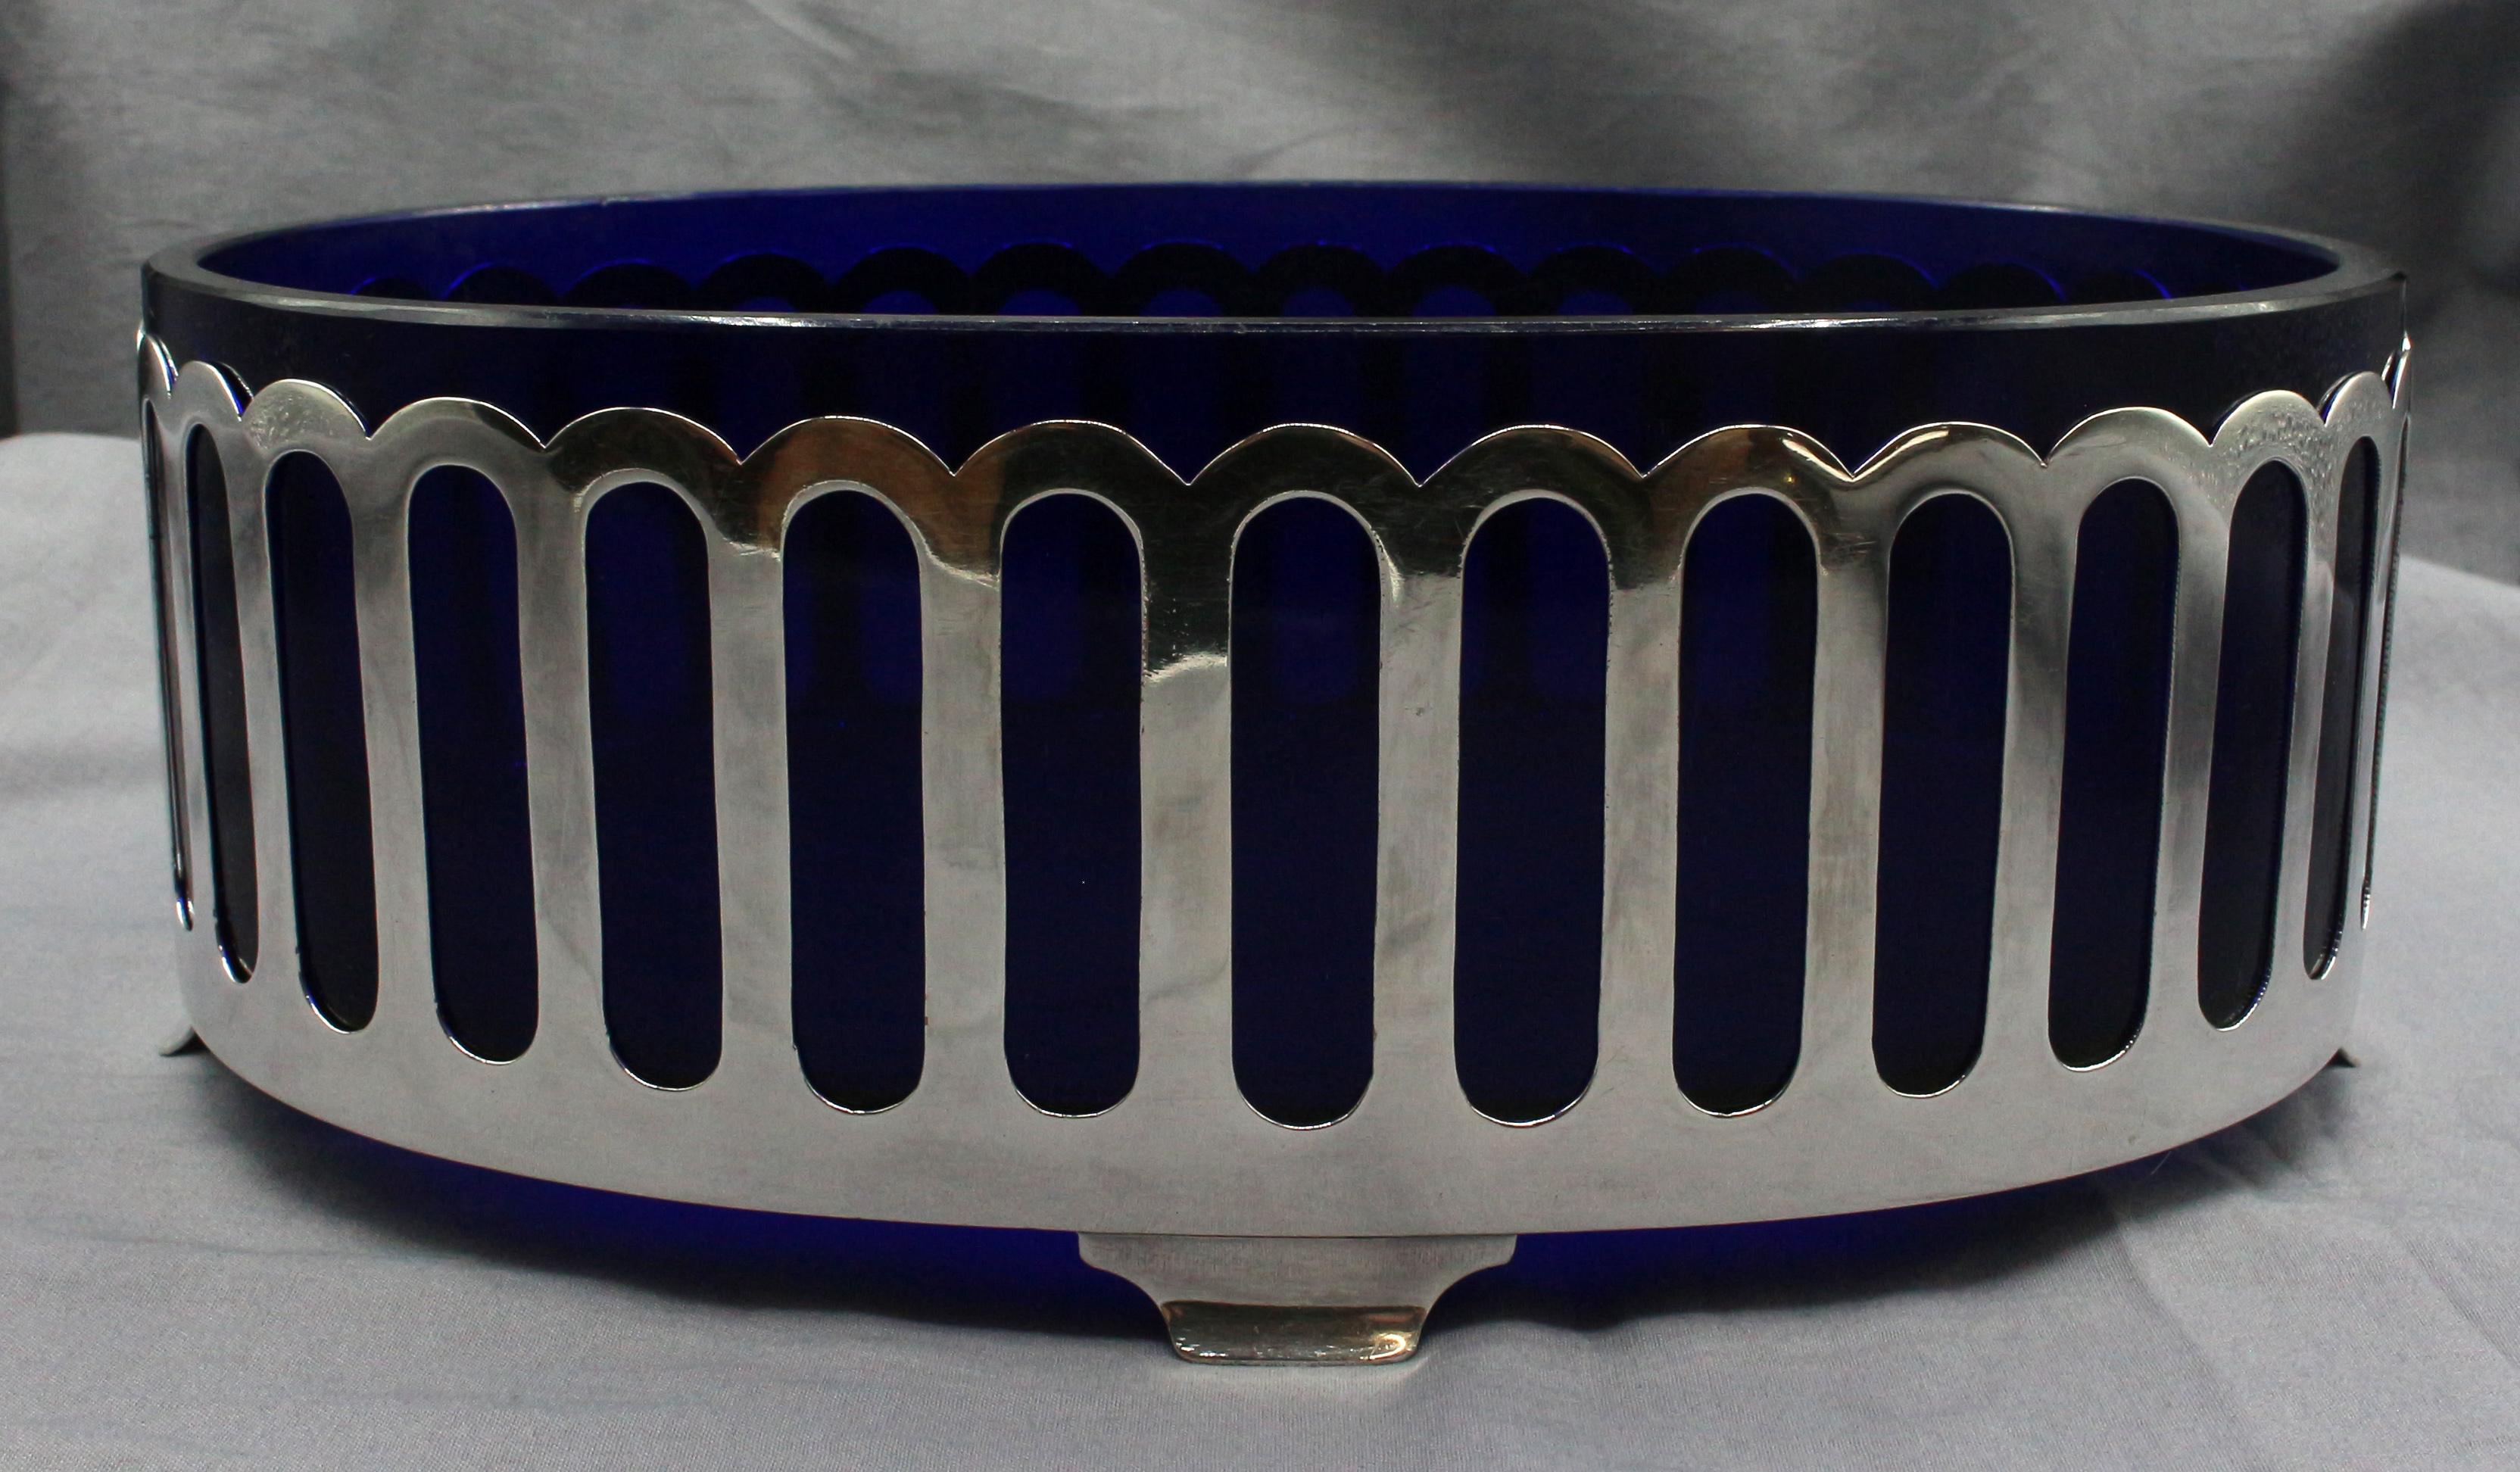 Art Deco circa 1930s cobalt glass & silver plated oval serving dish or centerpiece. Very stylish, the cobalt blue glass striking against the cut-work silver plate. Interior of the bowl with scratches from use over nearly 100 years.
10.75